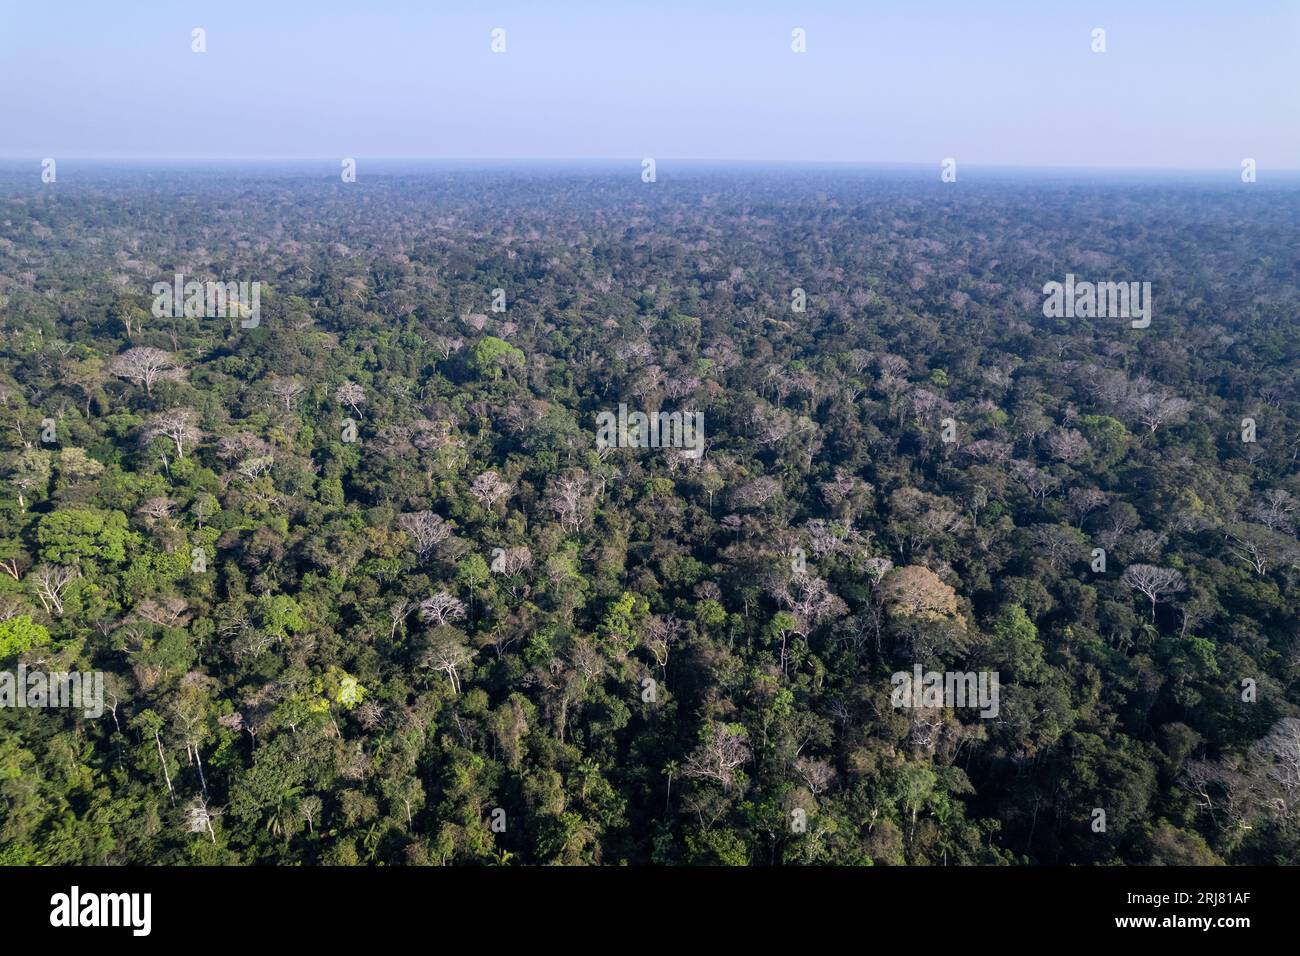 Amazon rainforest trees aerial beautiful drone view, primary forest in environmental conservation area. Amazonas, Brazil. Environment, ecology. Stock Photo